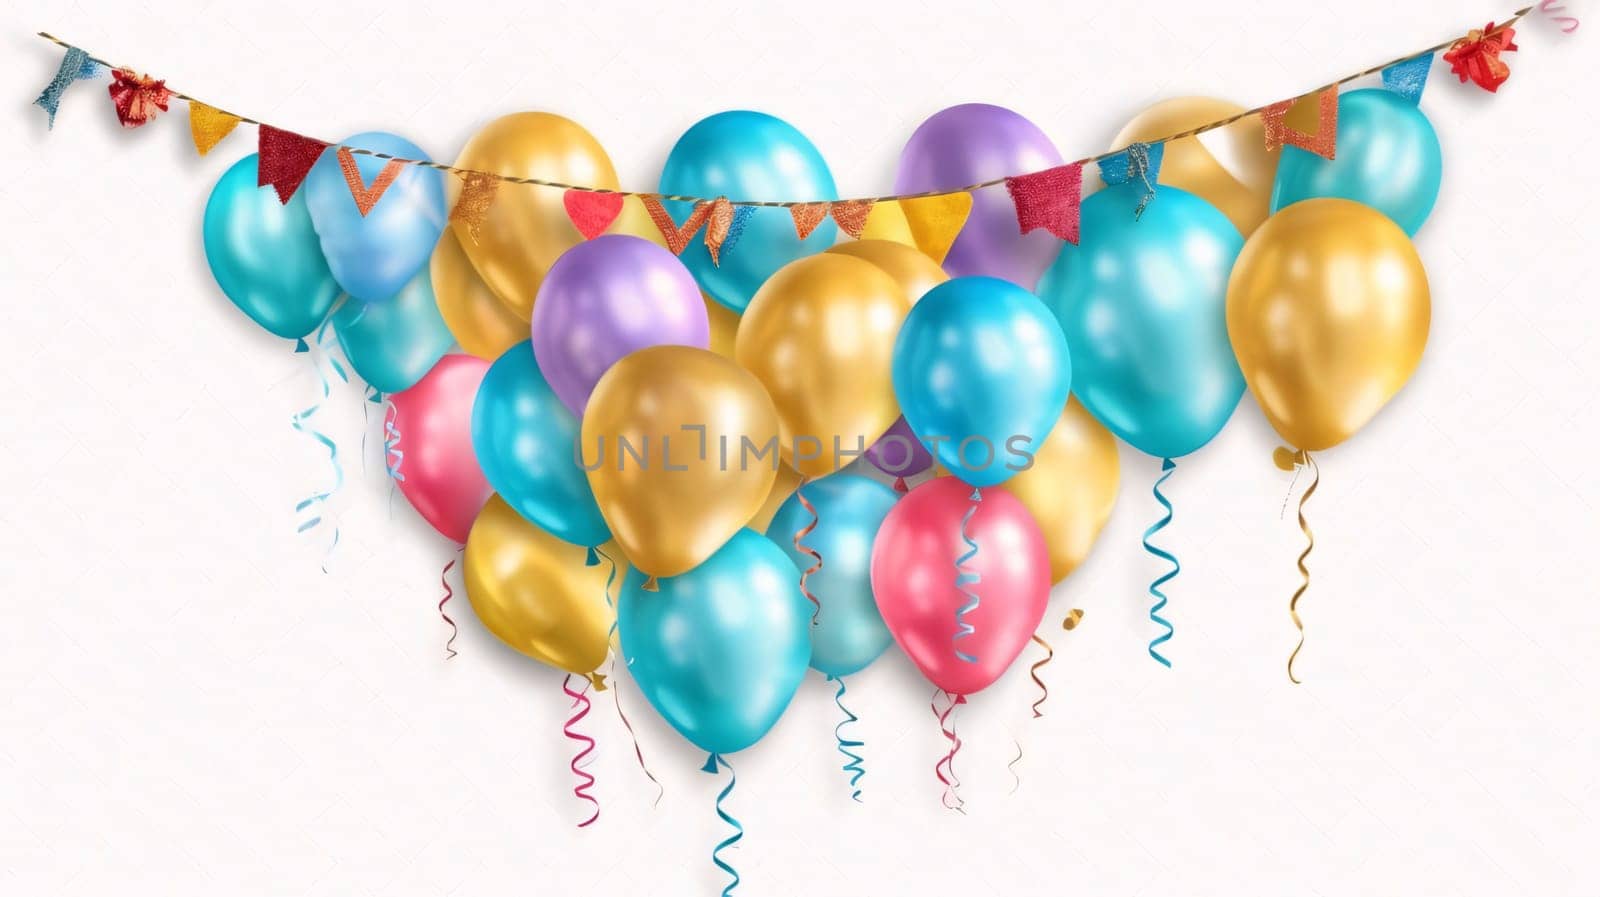 Celebration banner with balloons and ribbons. Vector illustration. by ThemesS